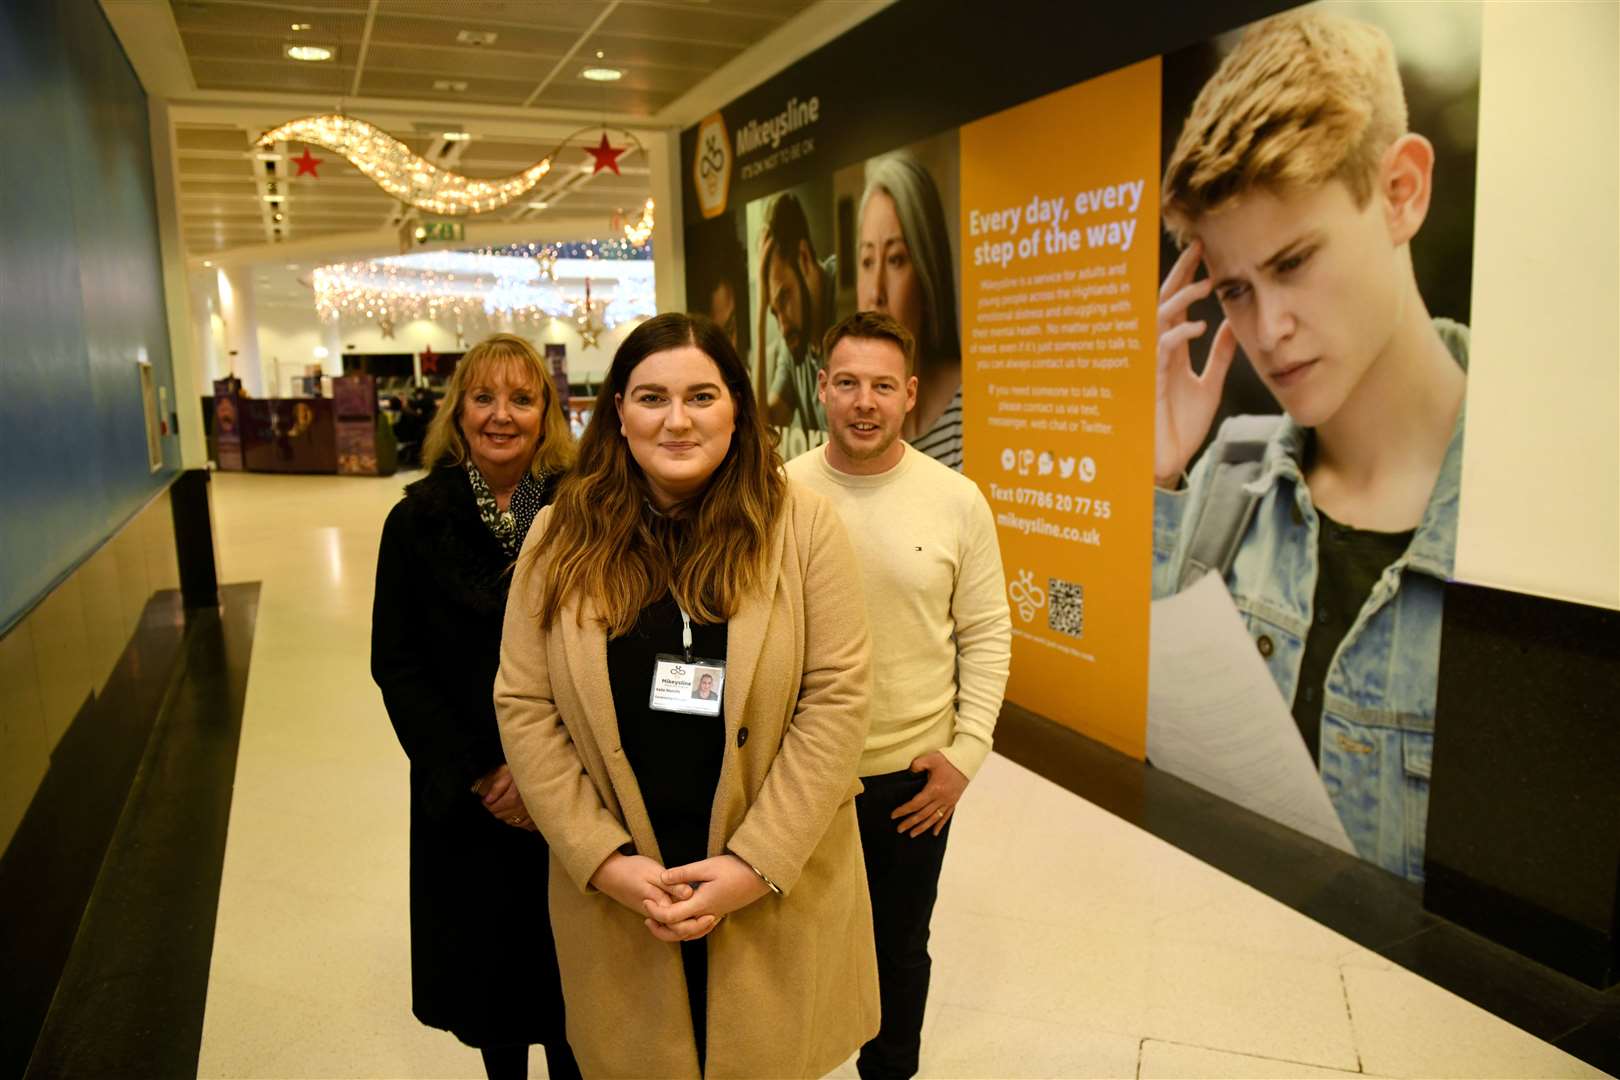 Jackie Cuddy, Eastgate Centre Manager, Katie Melville, Mikeysline Fundraising Manager and Mark Harper, Acorn Signs Director in front of the new poster. Picture: James Mackenzie.